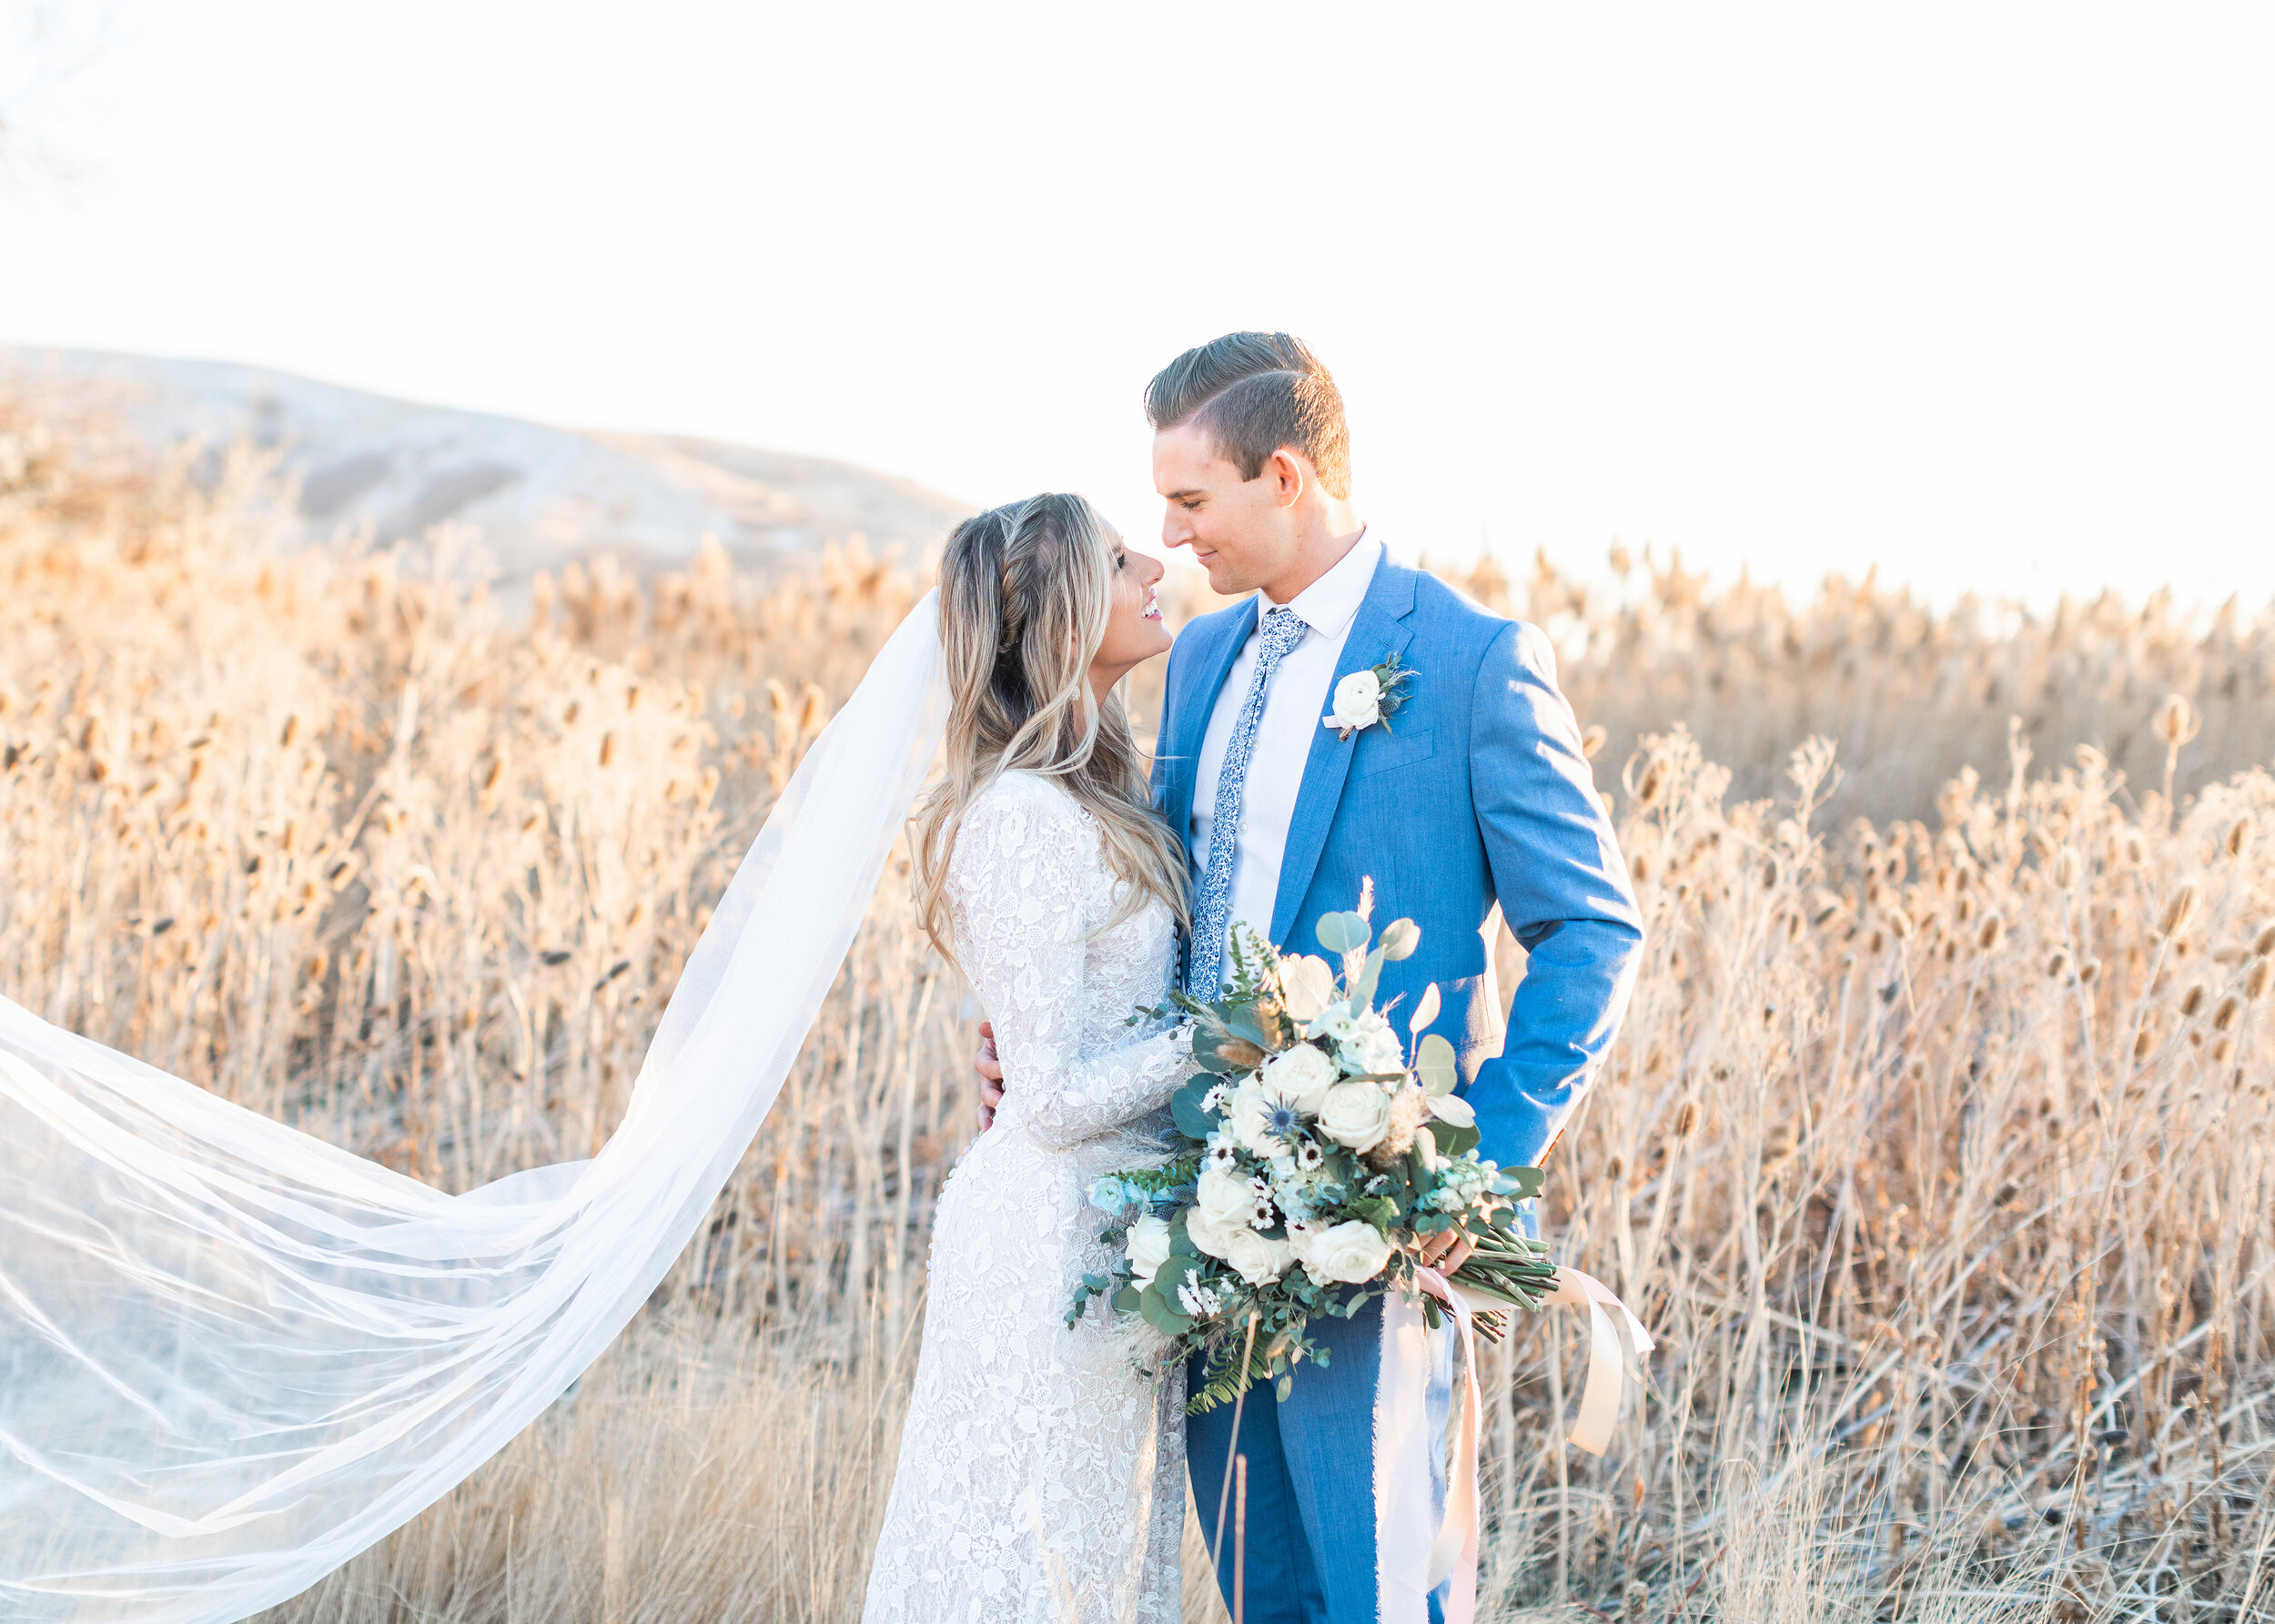  Set amid rolling Utah hills and tall dried grass, Clarity Lane Photography captures a love-filled wedding session in Tunnel Springs Park in Salt Lake City, Utah. professional bridal session photographer in salt lake city utah, long bridal veil train